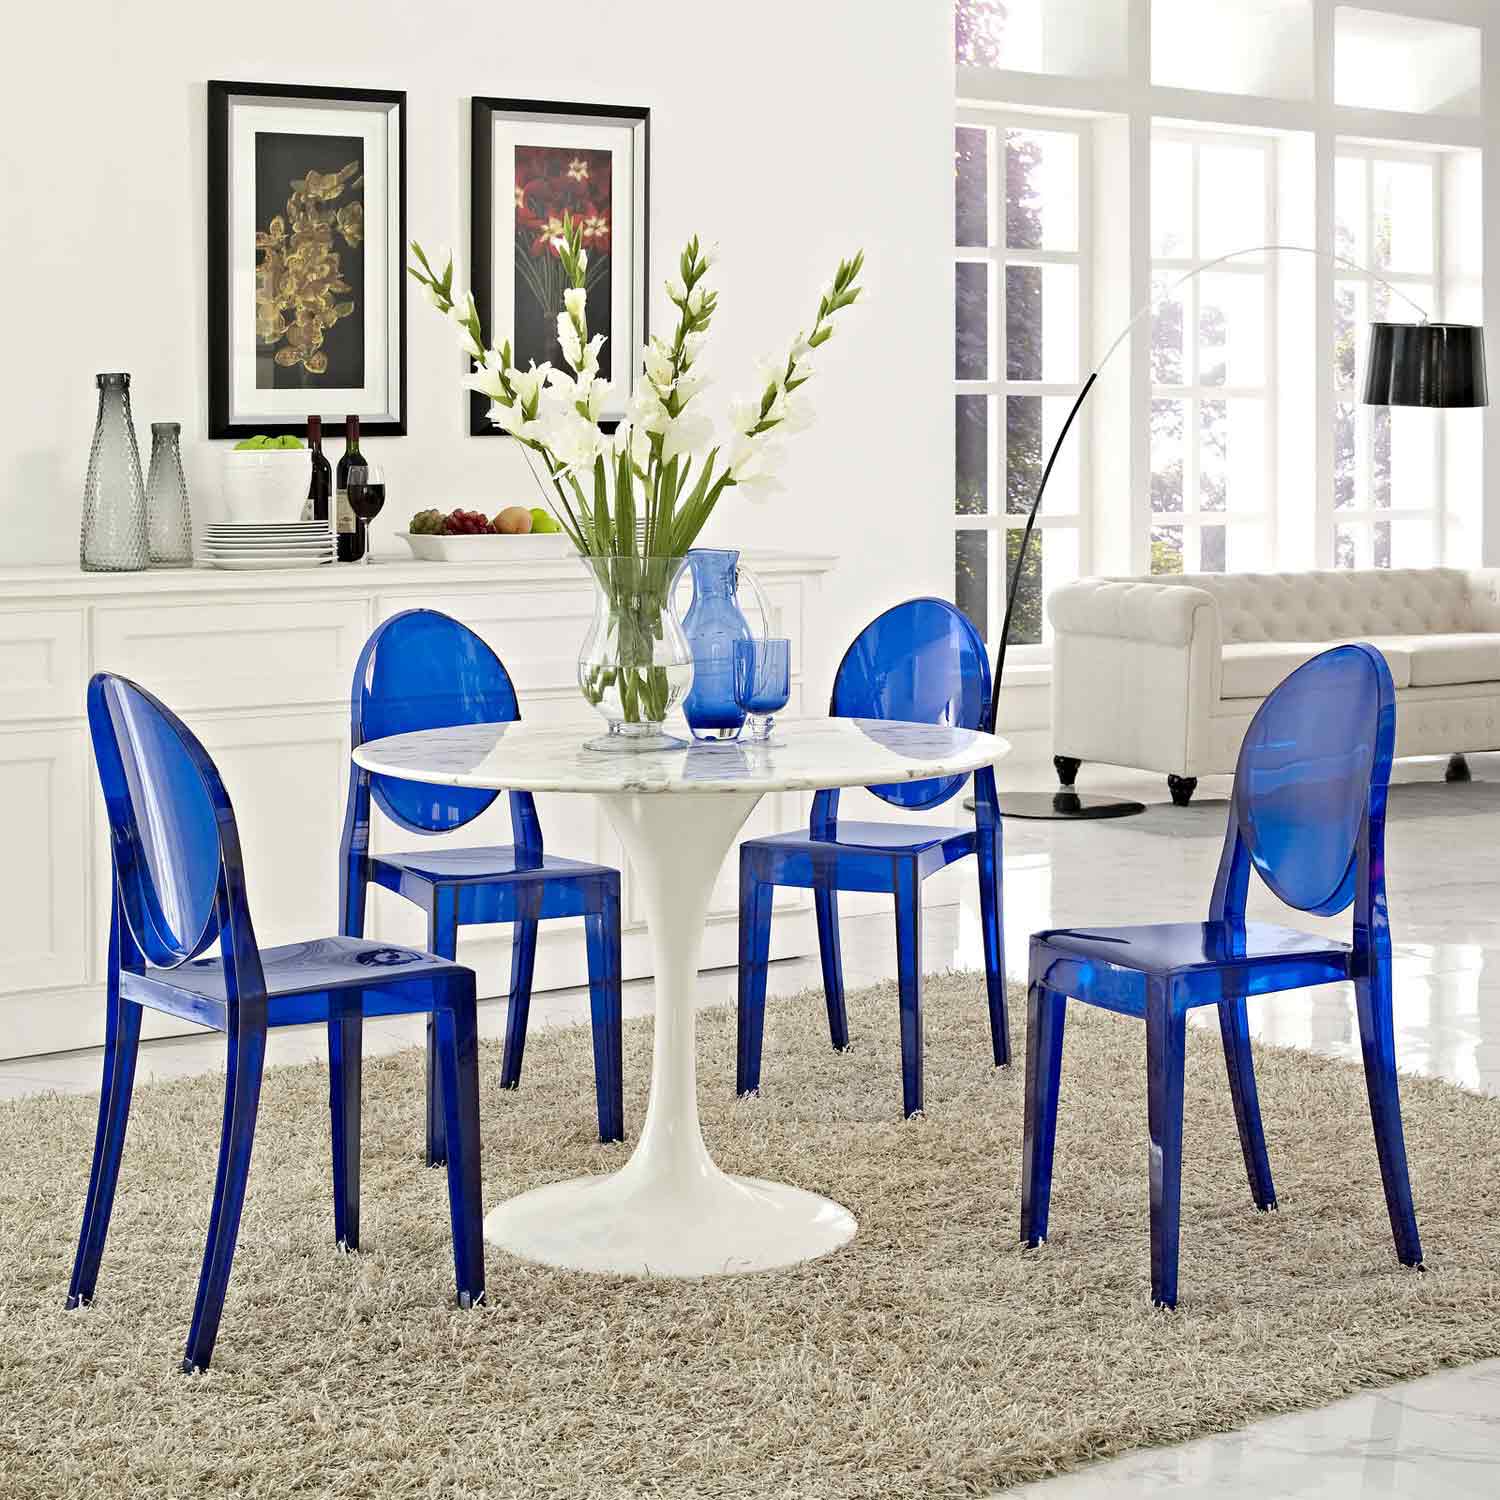 Modway Casper Dining Chairs Set of 4 - Blue